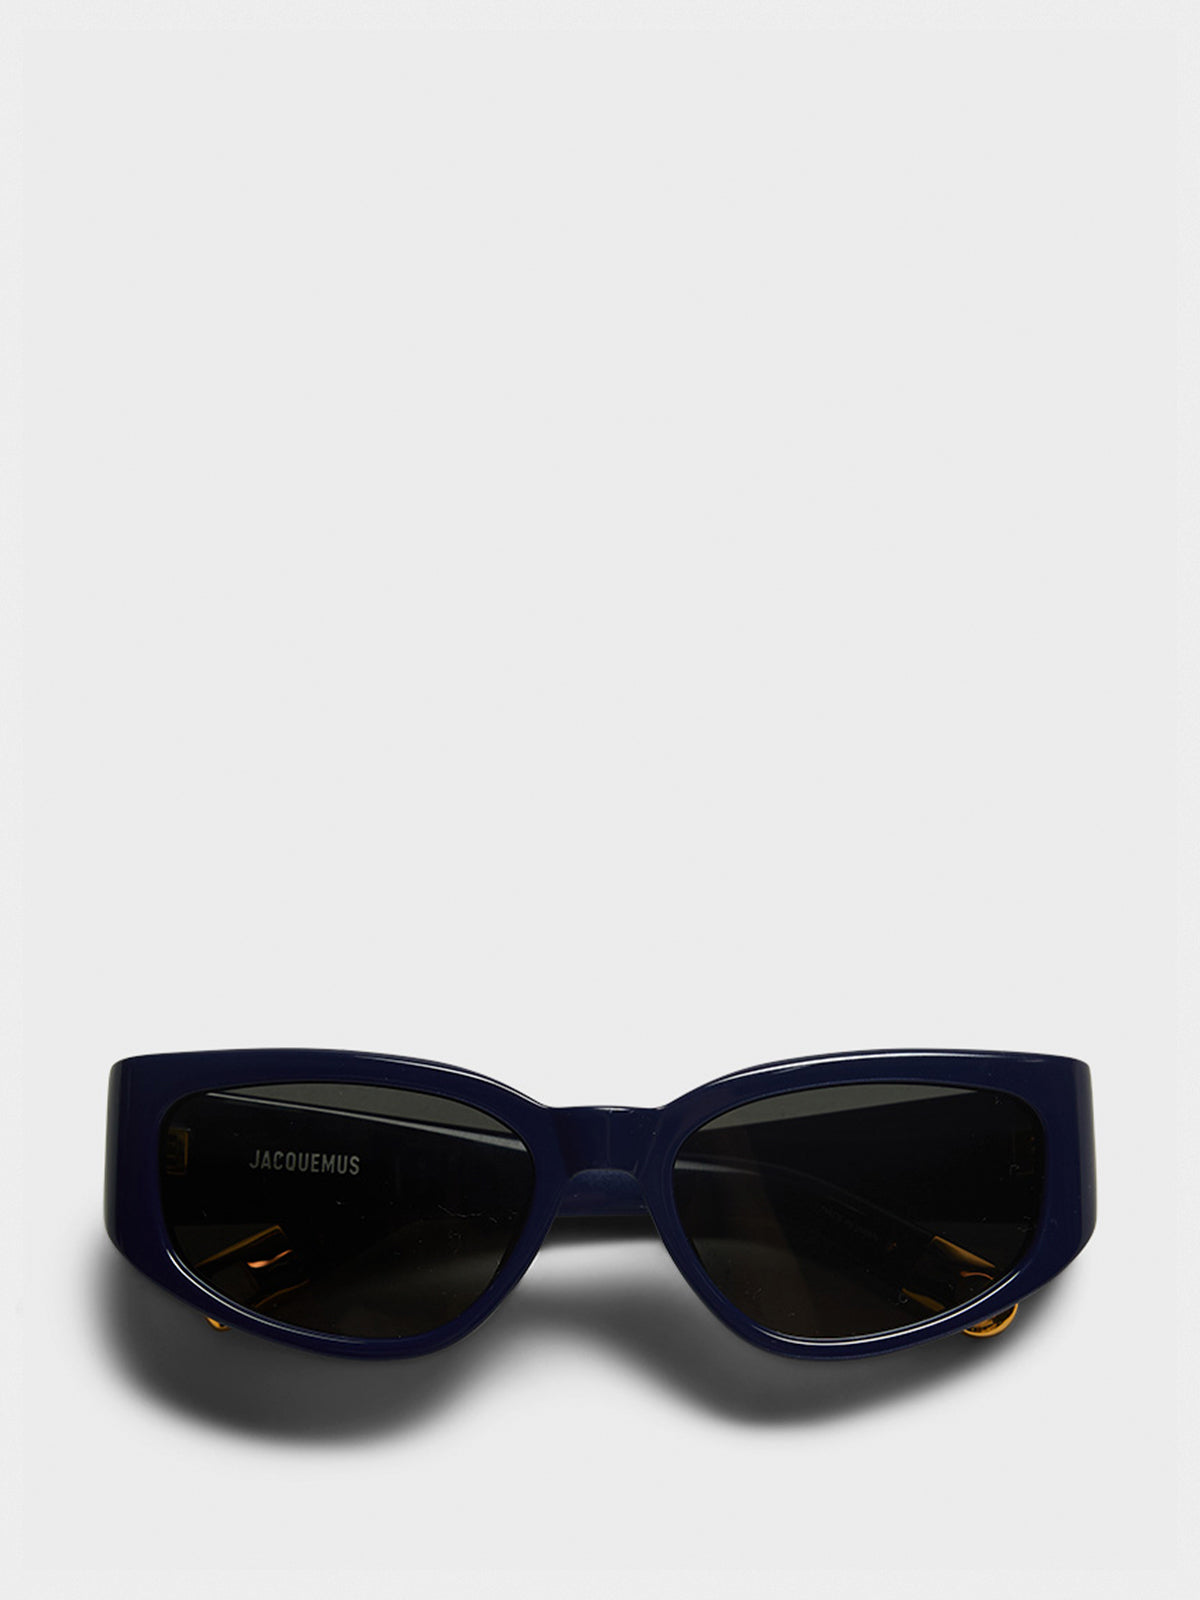 Gala Sunglasses in Navy, Yellow Gold and Grey